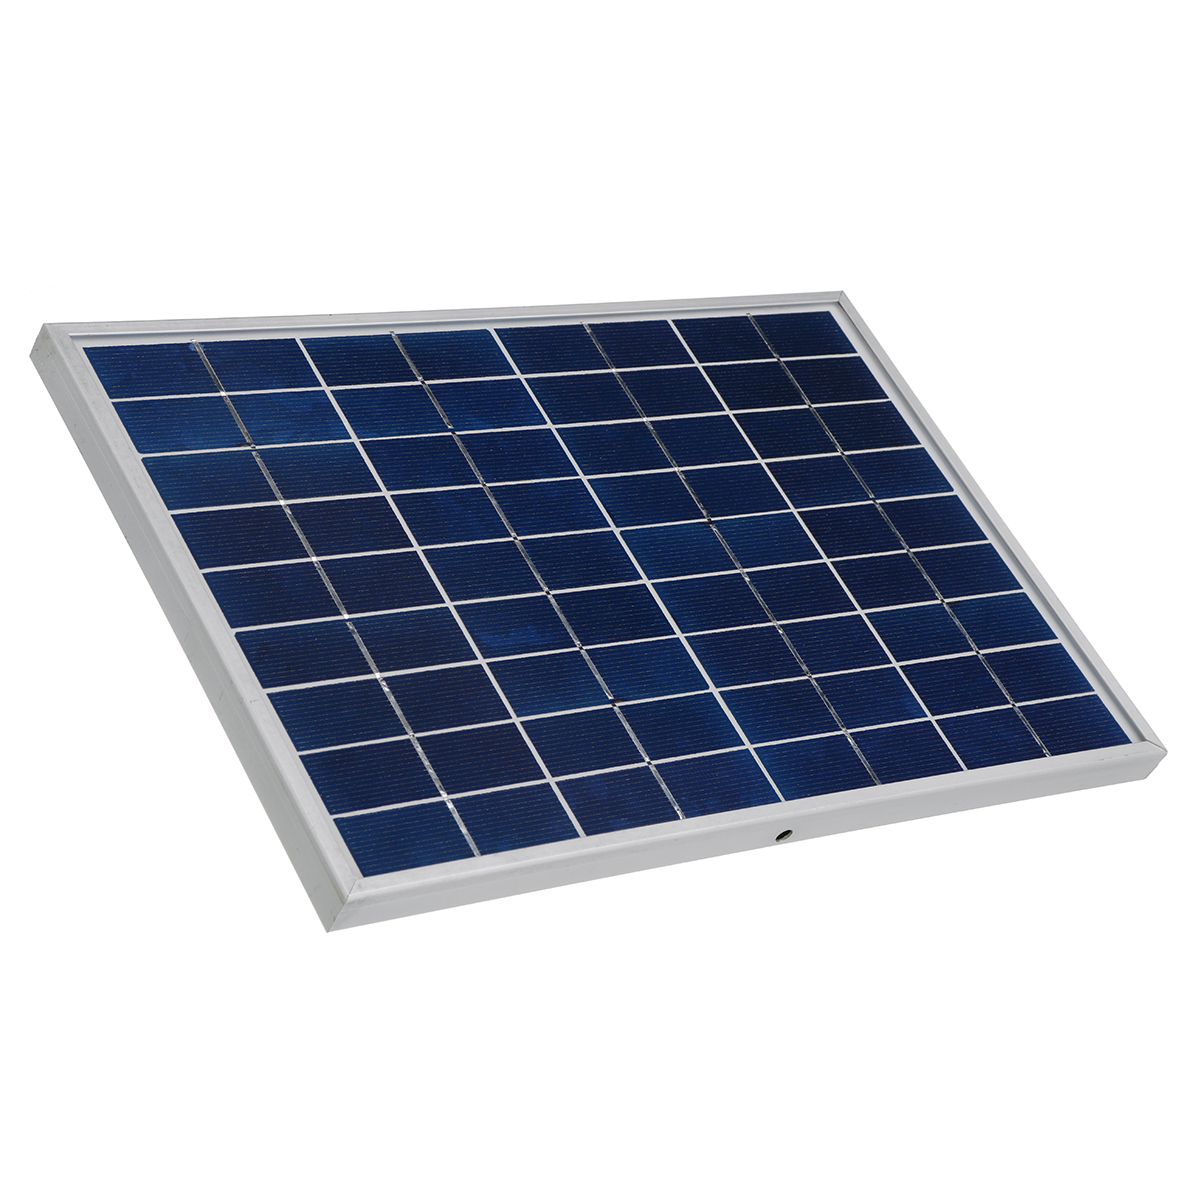 Solar-Panel-Power-System-Complete-Kit-18V-30W-Solar-Panel-60A-Charger-USB-Controller-1000W-Solar-Inv-1837386-8